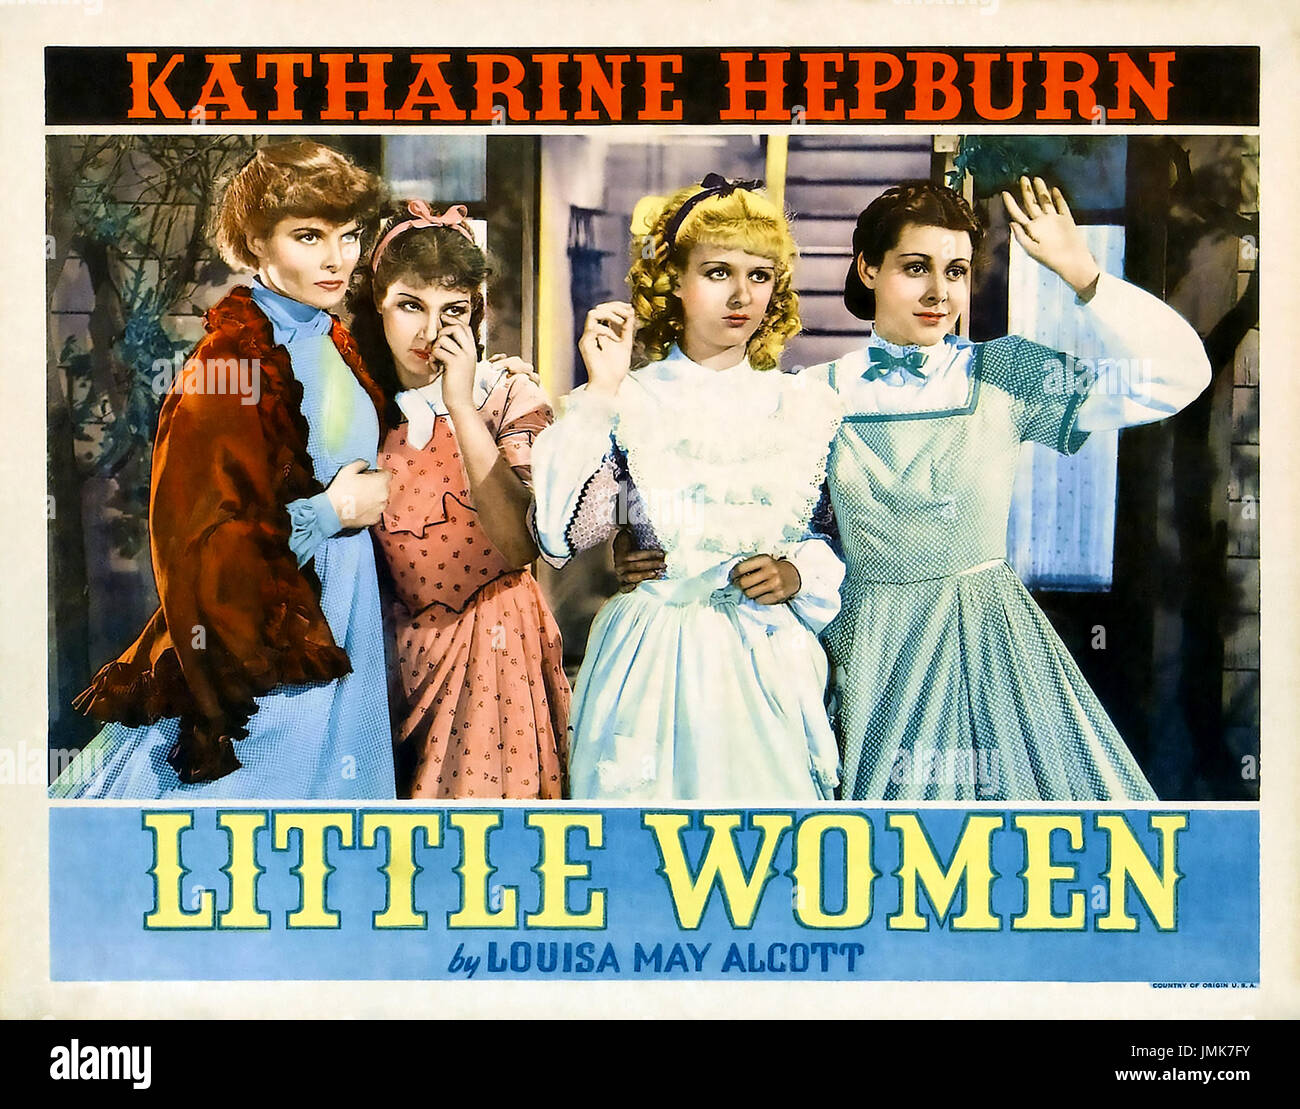 LITTLE WOMEN 1949 MGM film with from left: June Allyson, Margaret O'Brien, Janet Leigh, Elizabeth Taylor Stock Photo